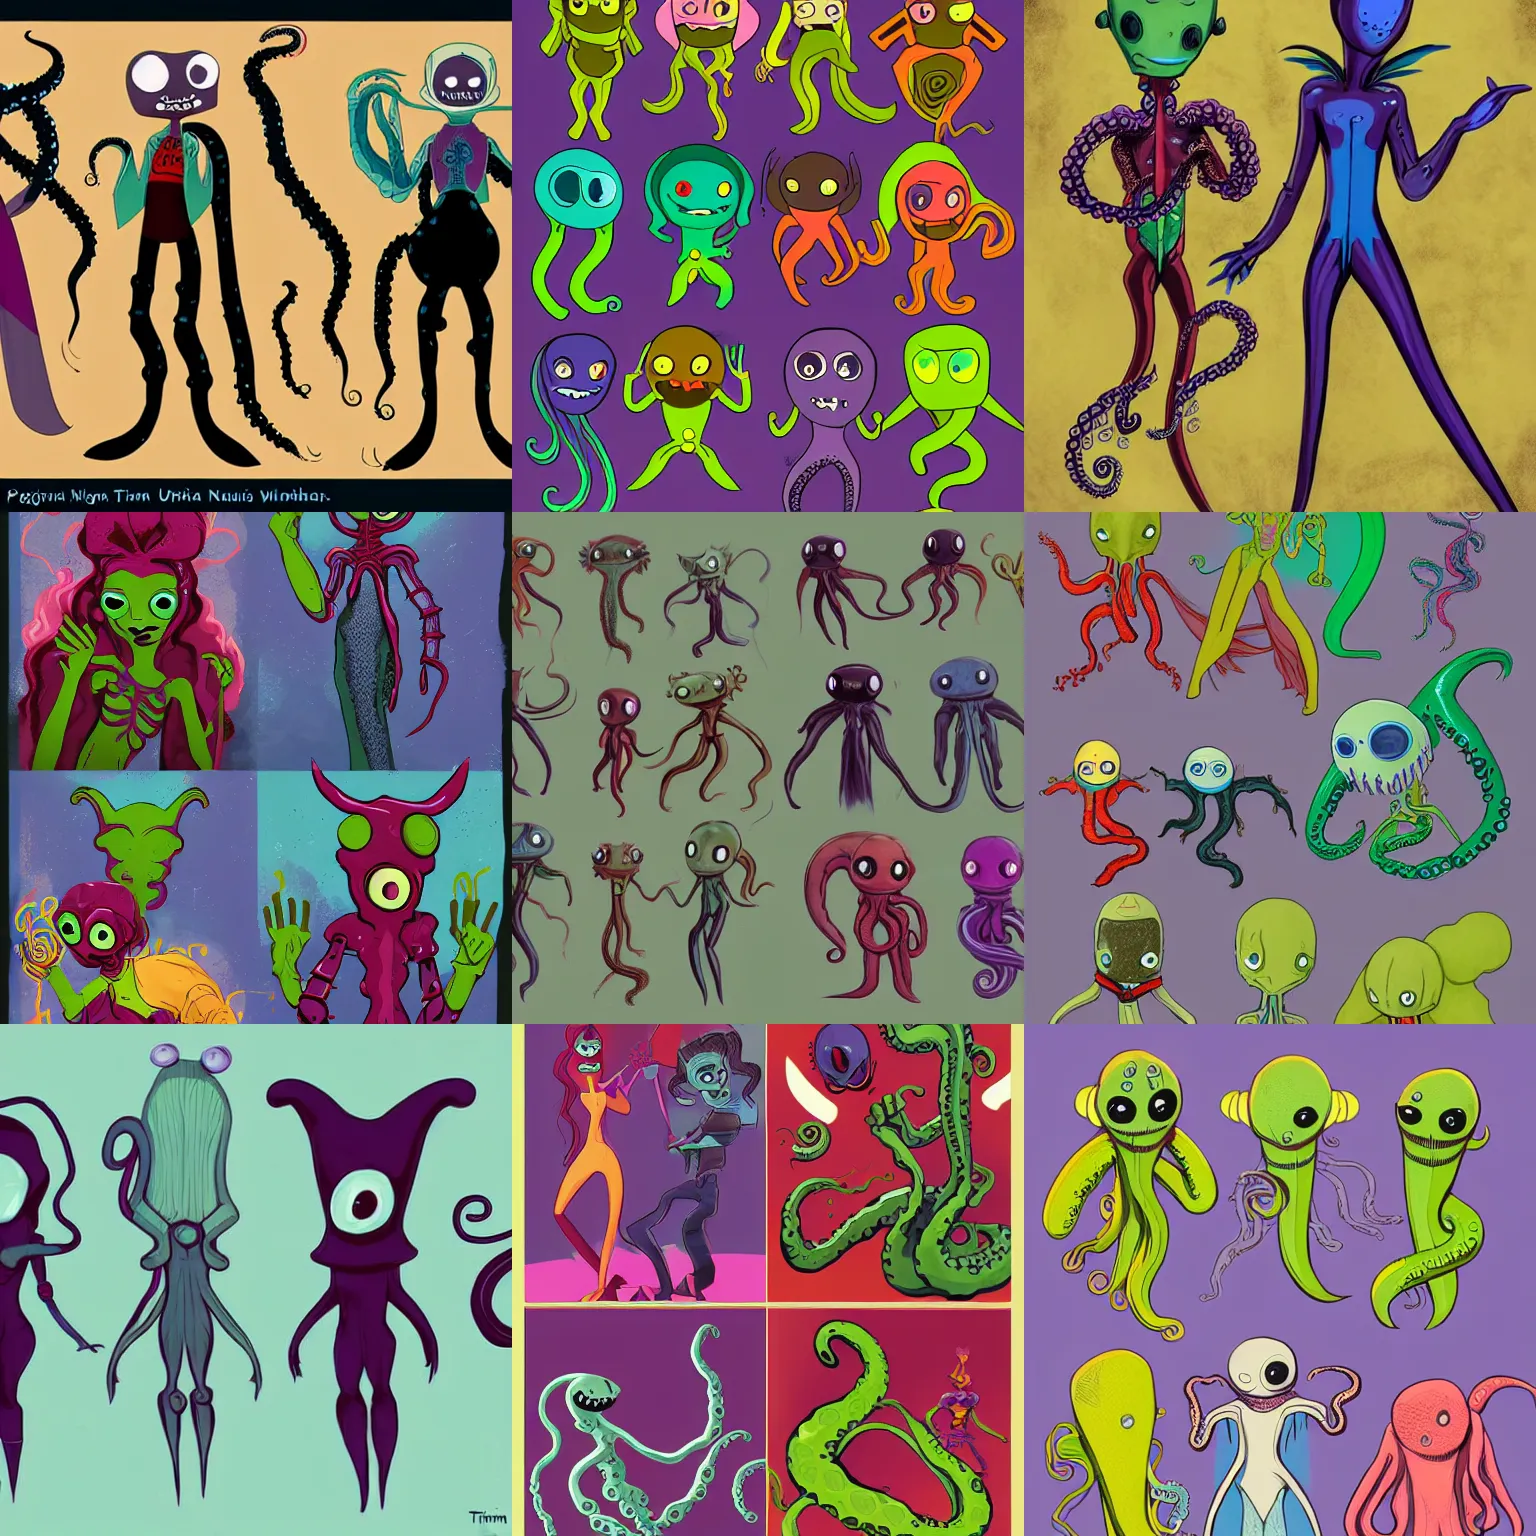 Prompt: vintage colorful friend shaped little vampire ninja aliens with big black alien eyes with three webbed tentacle arms and skinny thin human legs inspired by Ursala from Disneys the little mermaid as playable characters design sheets for the newest psychonauts video game made by double fine done by tim shafer that focuses on an ocean setting with help from the artists of odd world inhabitants inc and Lauren faust from her work on dc superhero girls and lead artist Andy Suriano from rise of the teenage mutant ninja turtles on nickelodeon using artistic cues for the game fret nice and art direction from the Sony 2018 animated film spiderverse